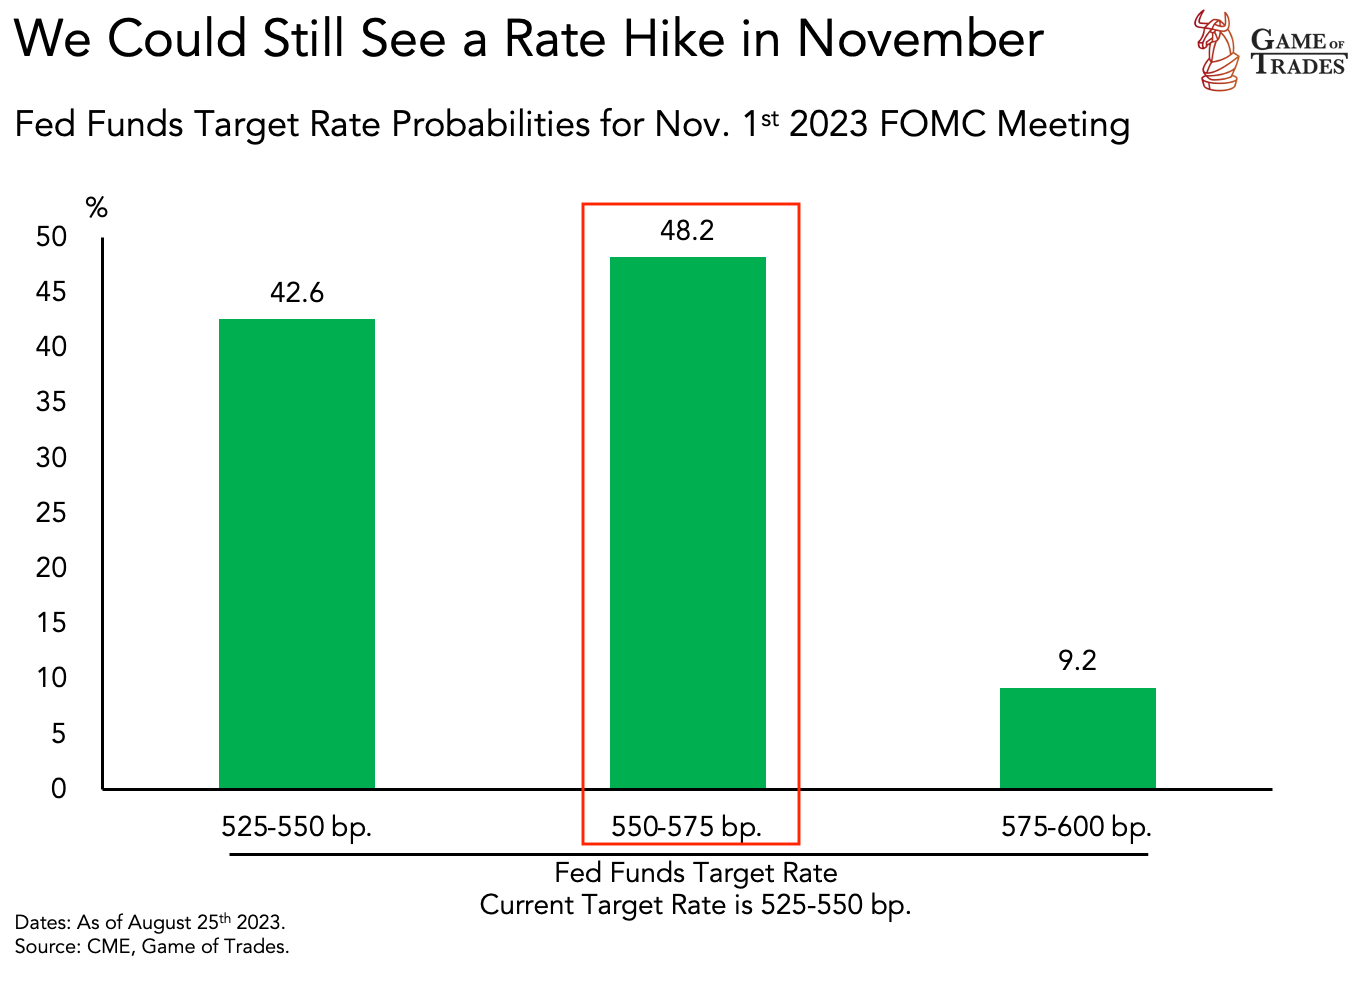 The Fed Funds Target